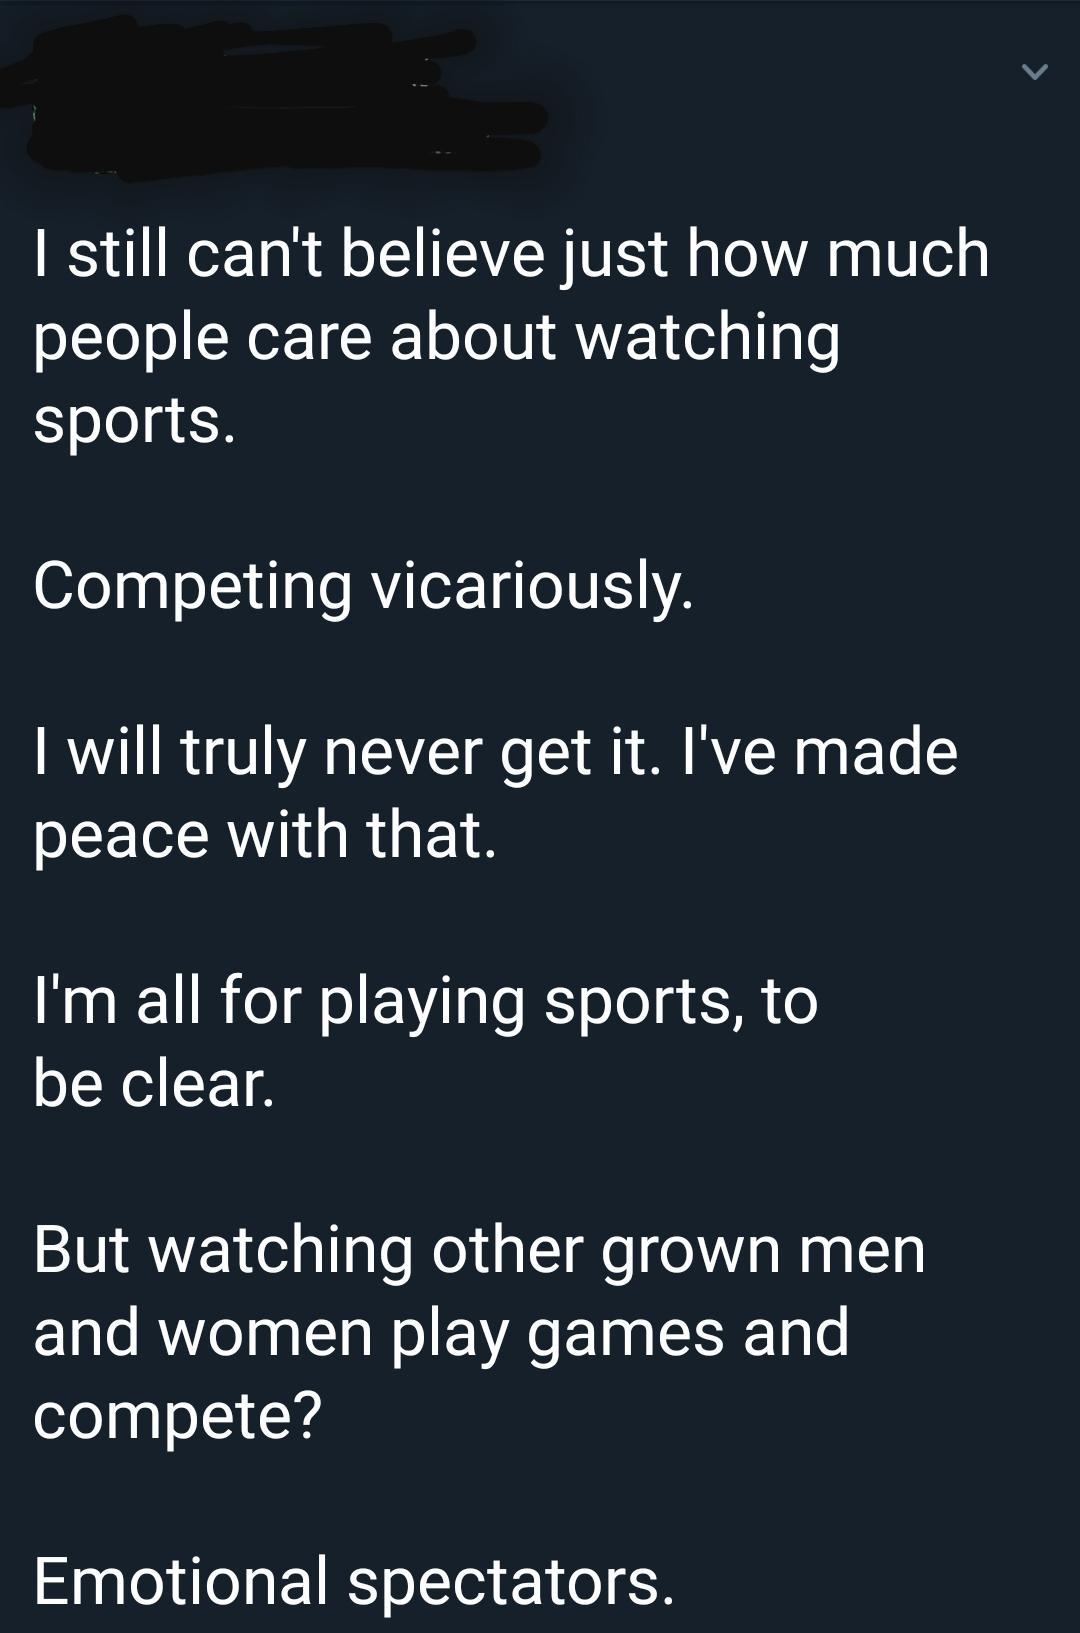 don t believe many people - I still can't believe just how much people care about watching sports. Competing vicariously. I will truly never get it. I've made peace with that. I'm all for playing sports, to be clear. But watching other grown men and women